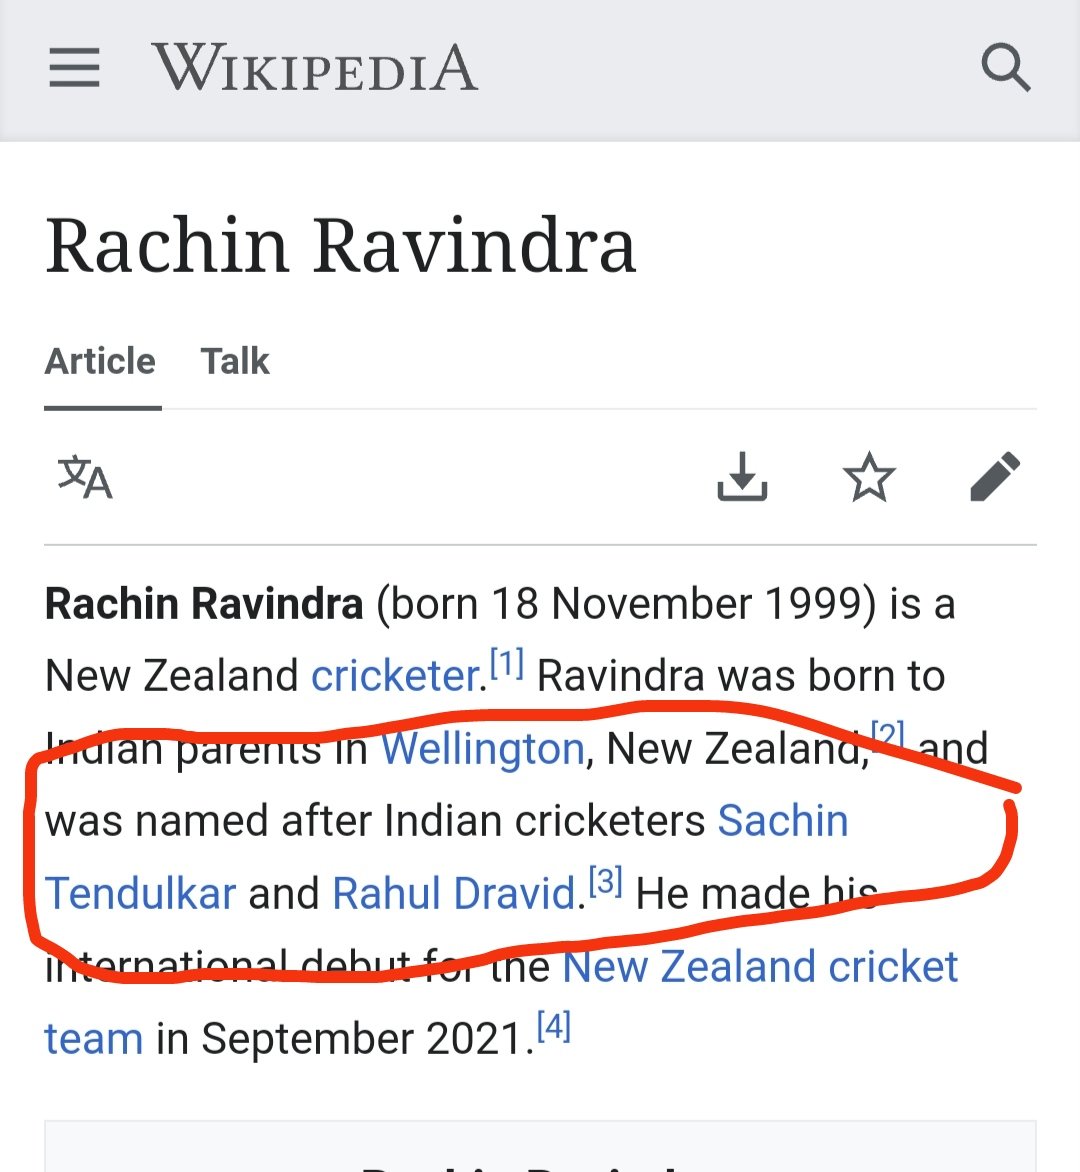 And he made it to international cricket. What a story 👏👏
#RachinRavindra
#INDvsNZ